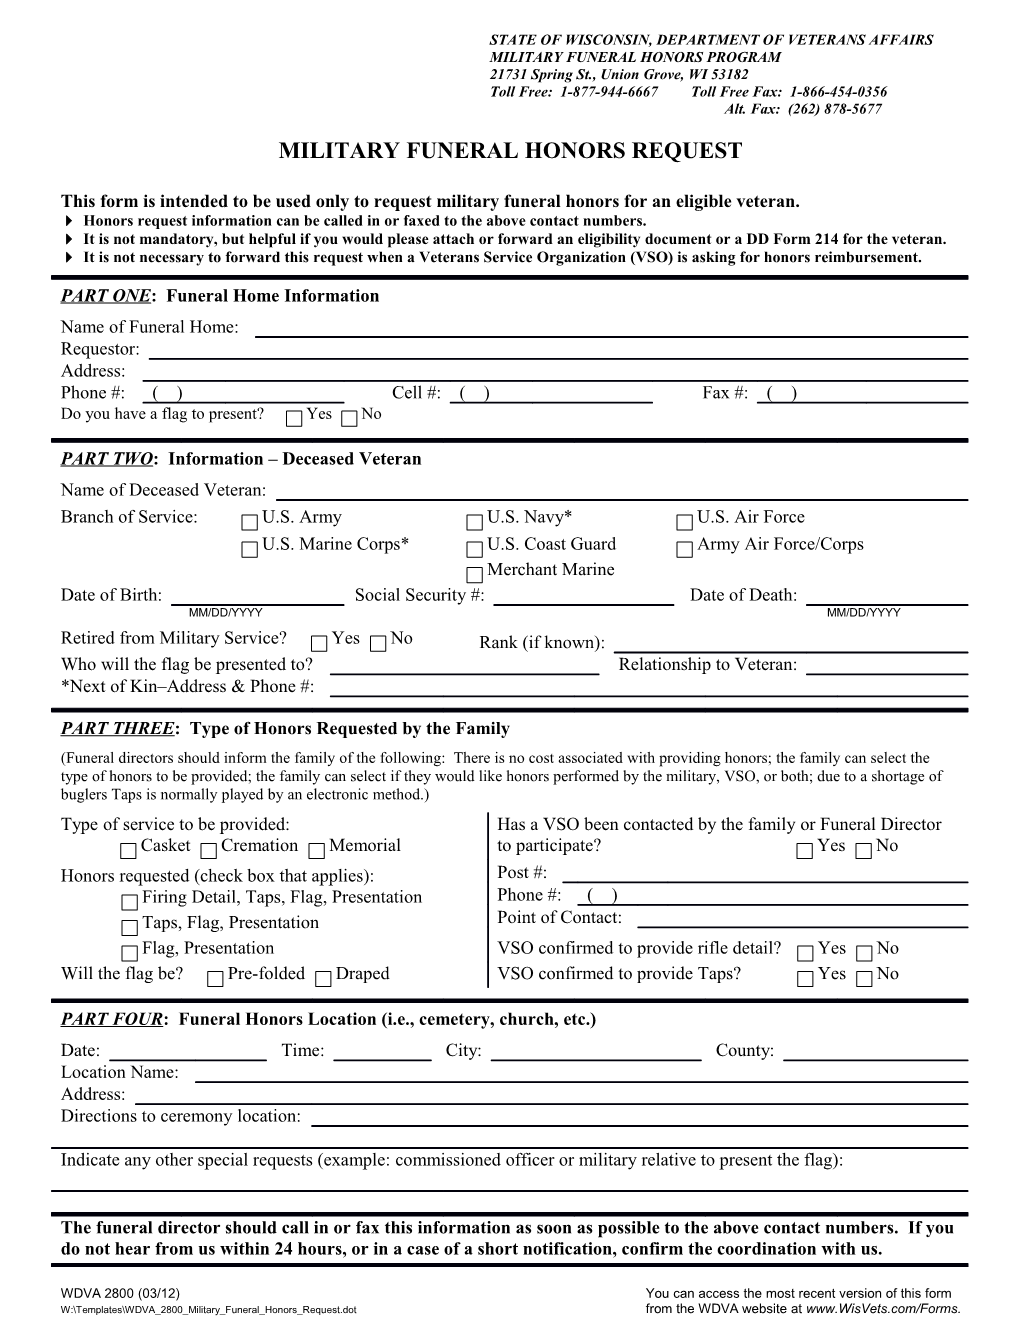 WDVA 2800 - Military Funeral Honors Request (Fillable for Printing)